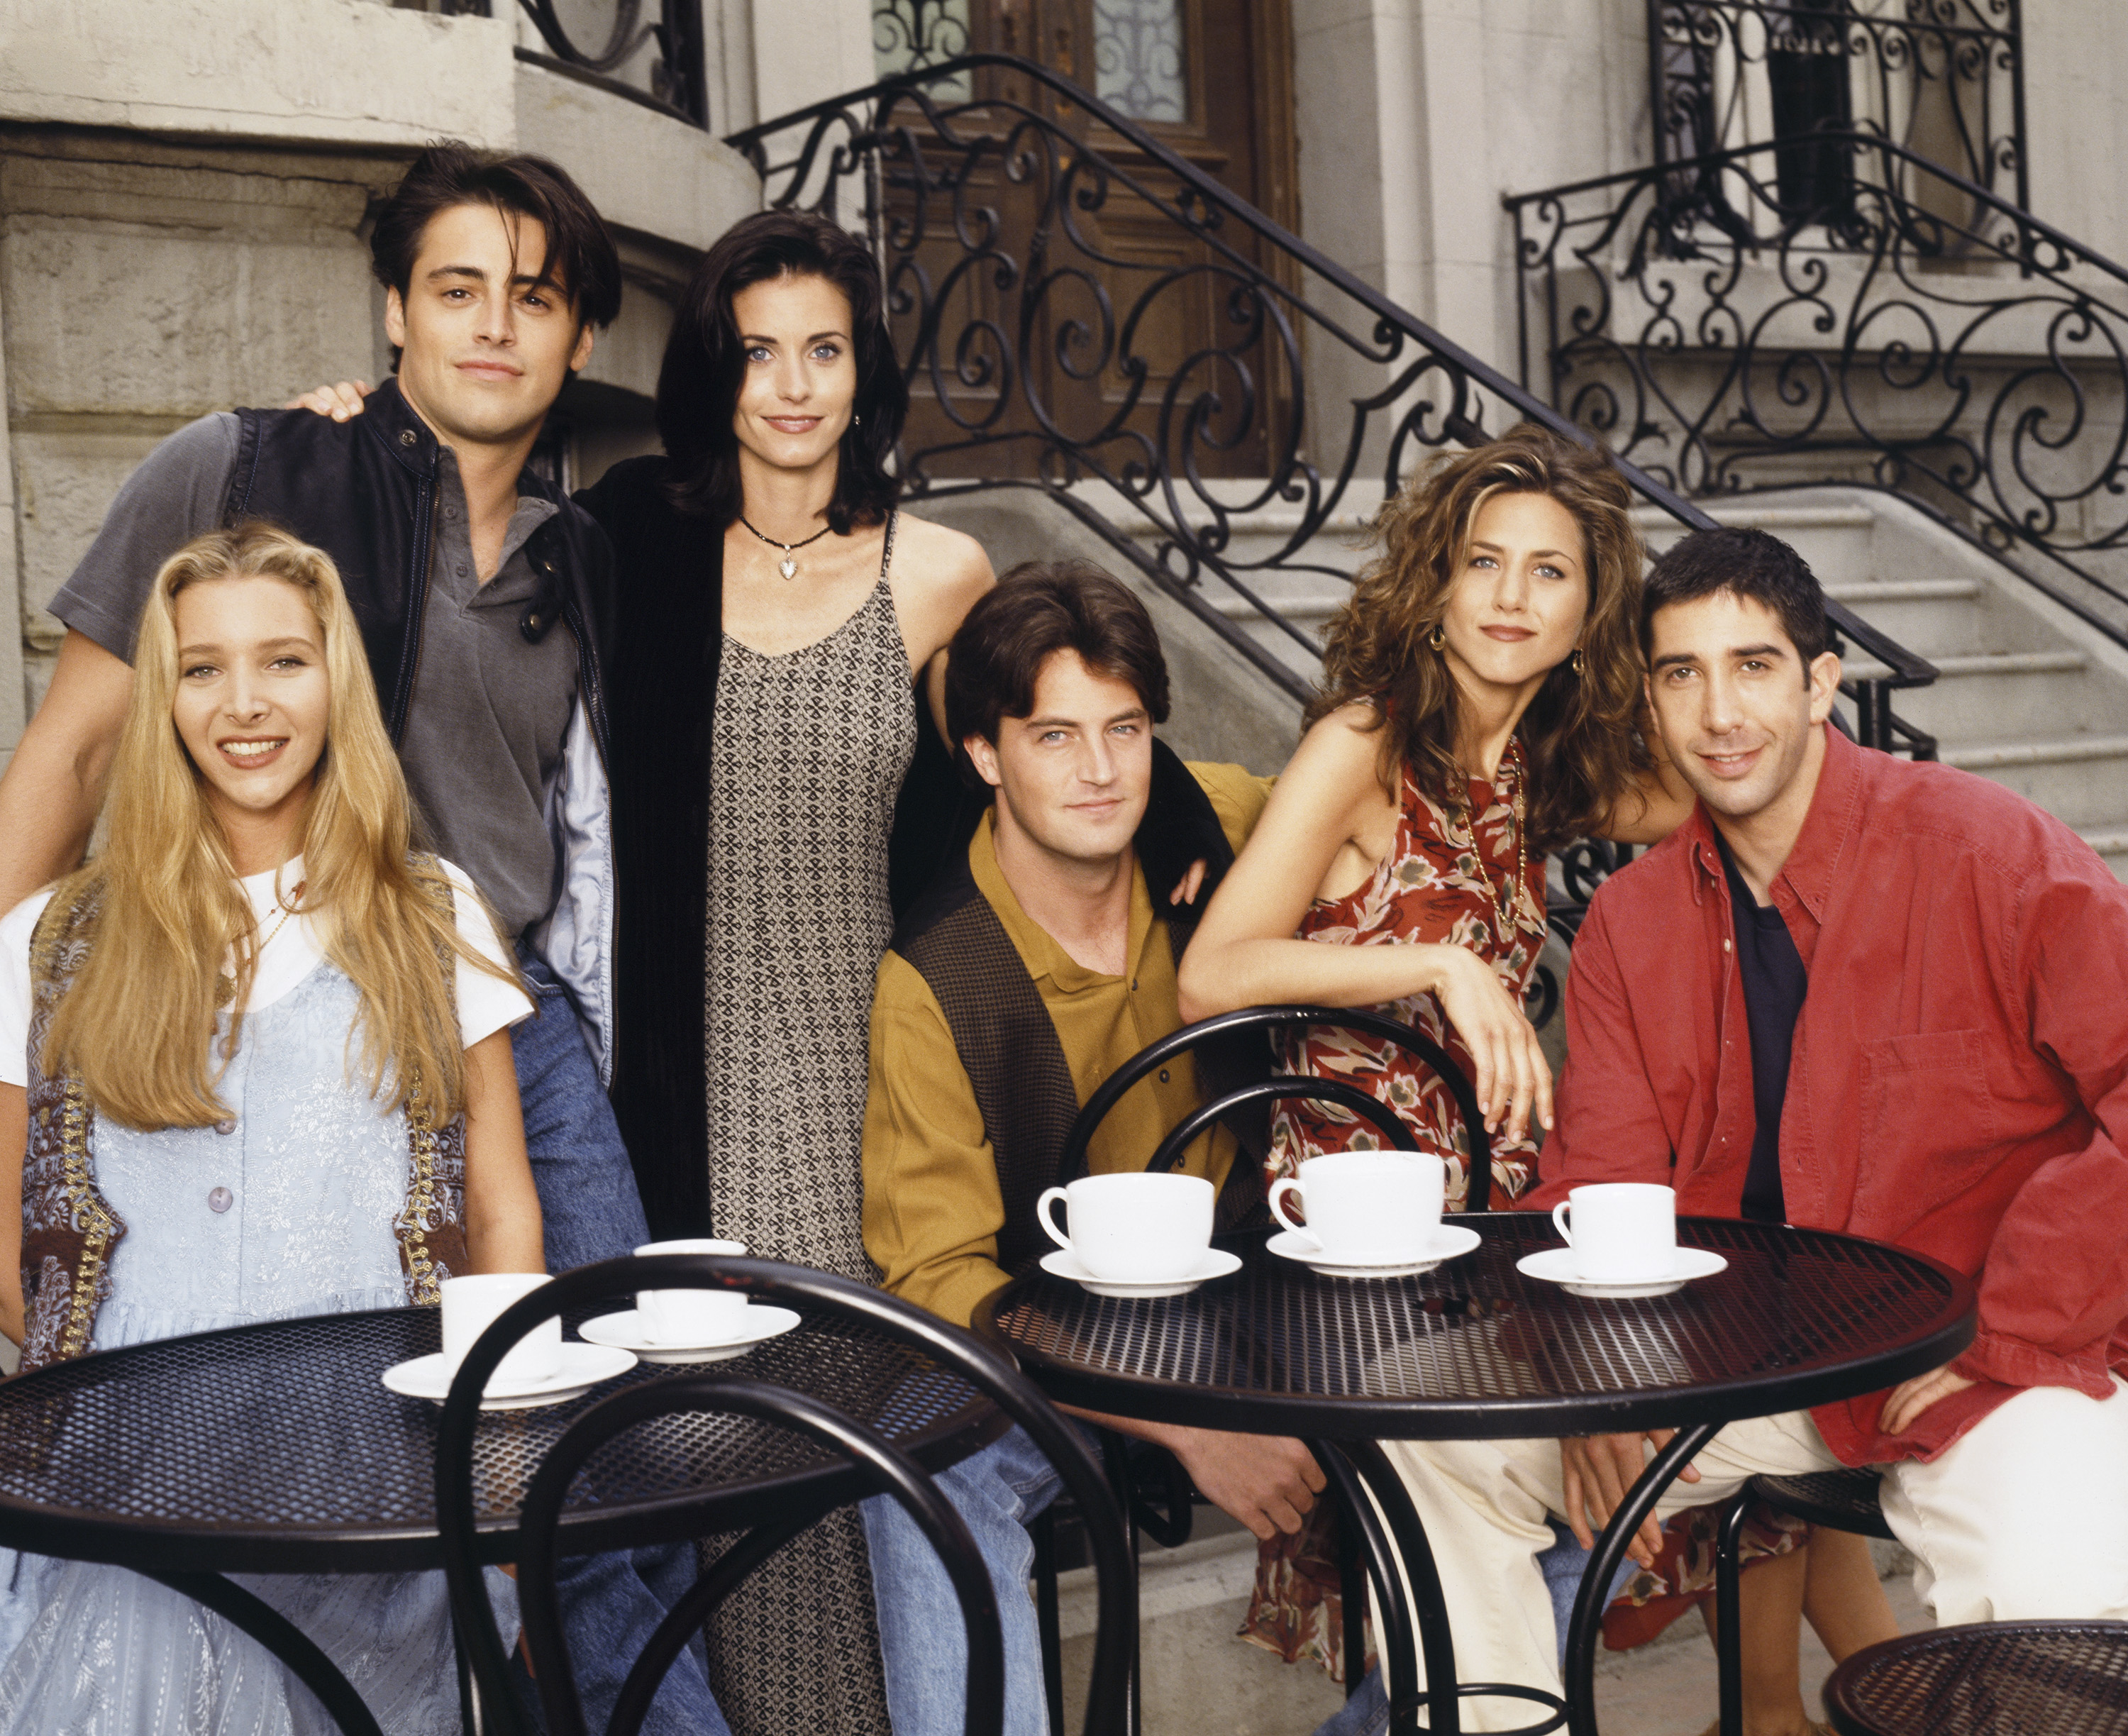 The six leads of Friends sitting or standing together at several tables